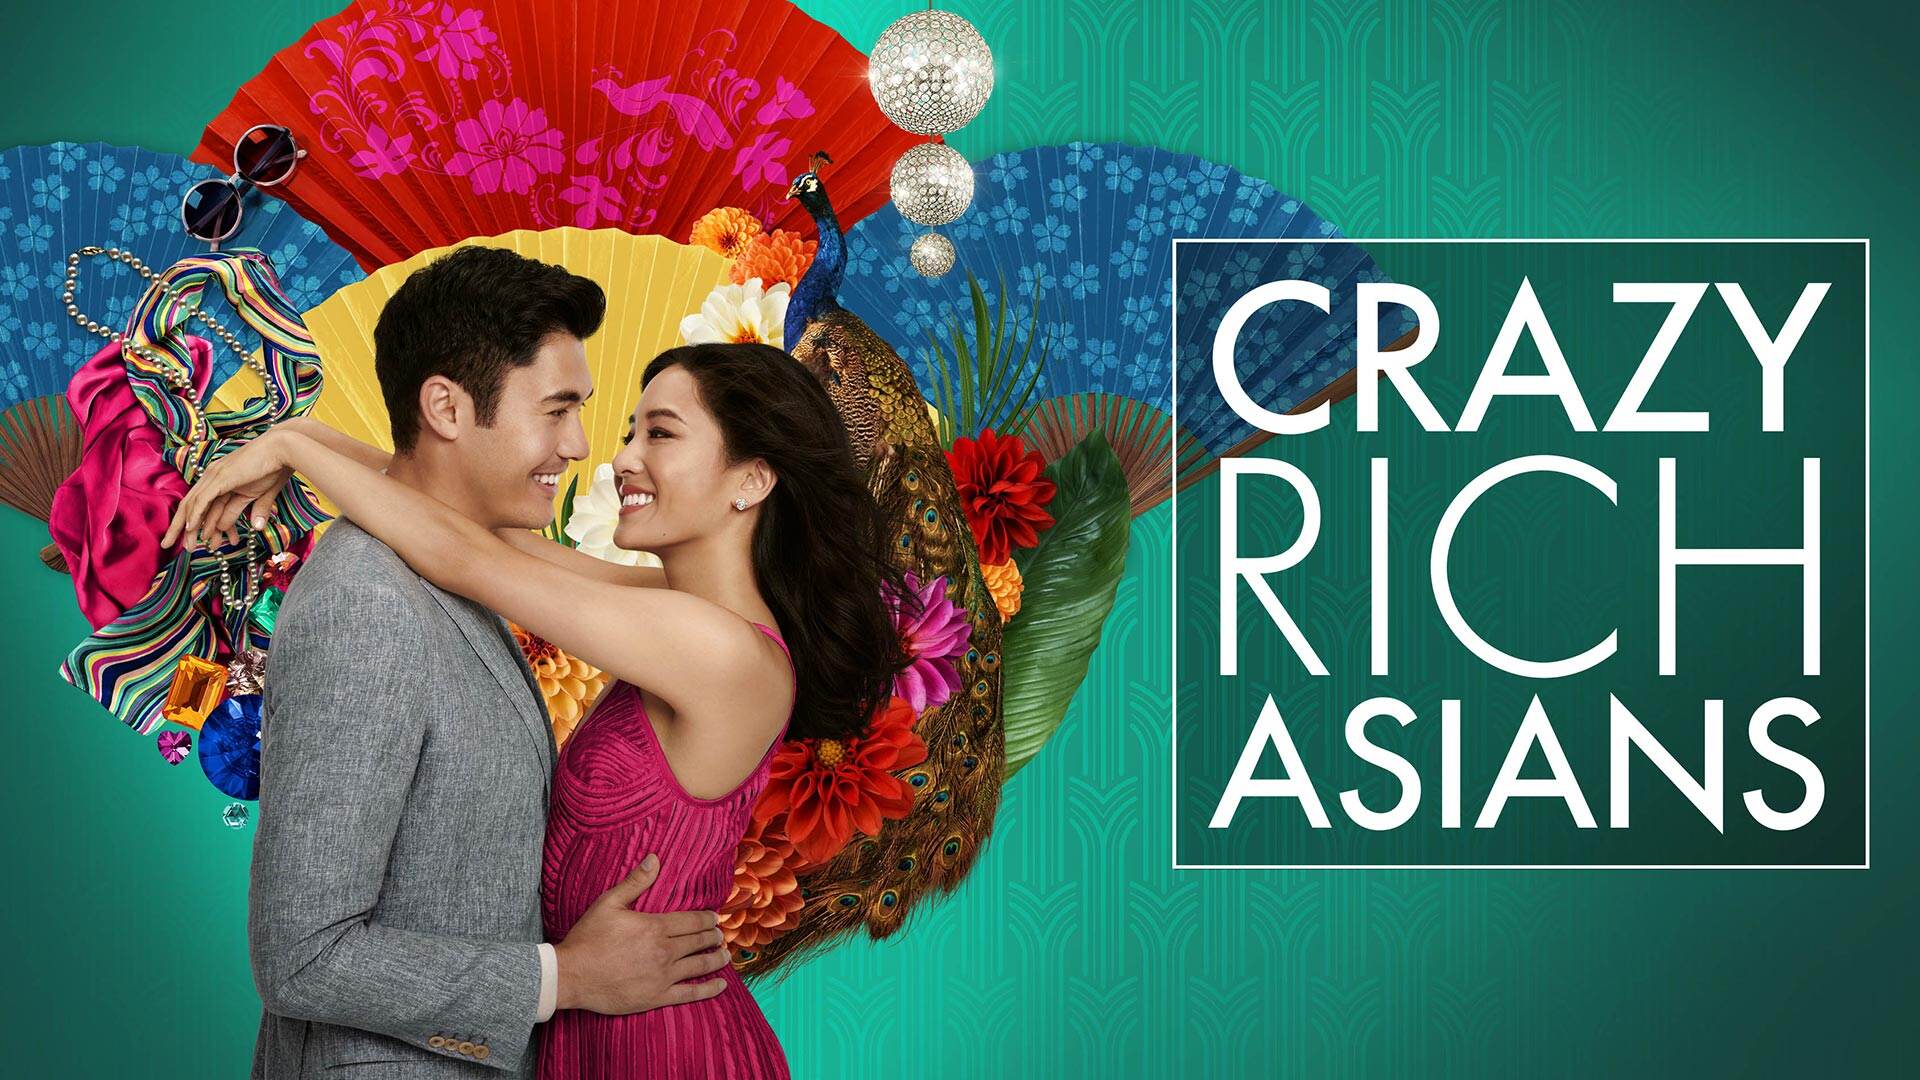 31 Facts about the movie Crazy Rich Asians - Facts.net